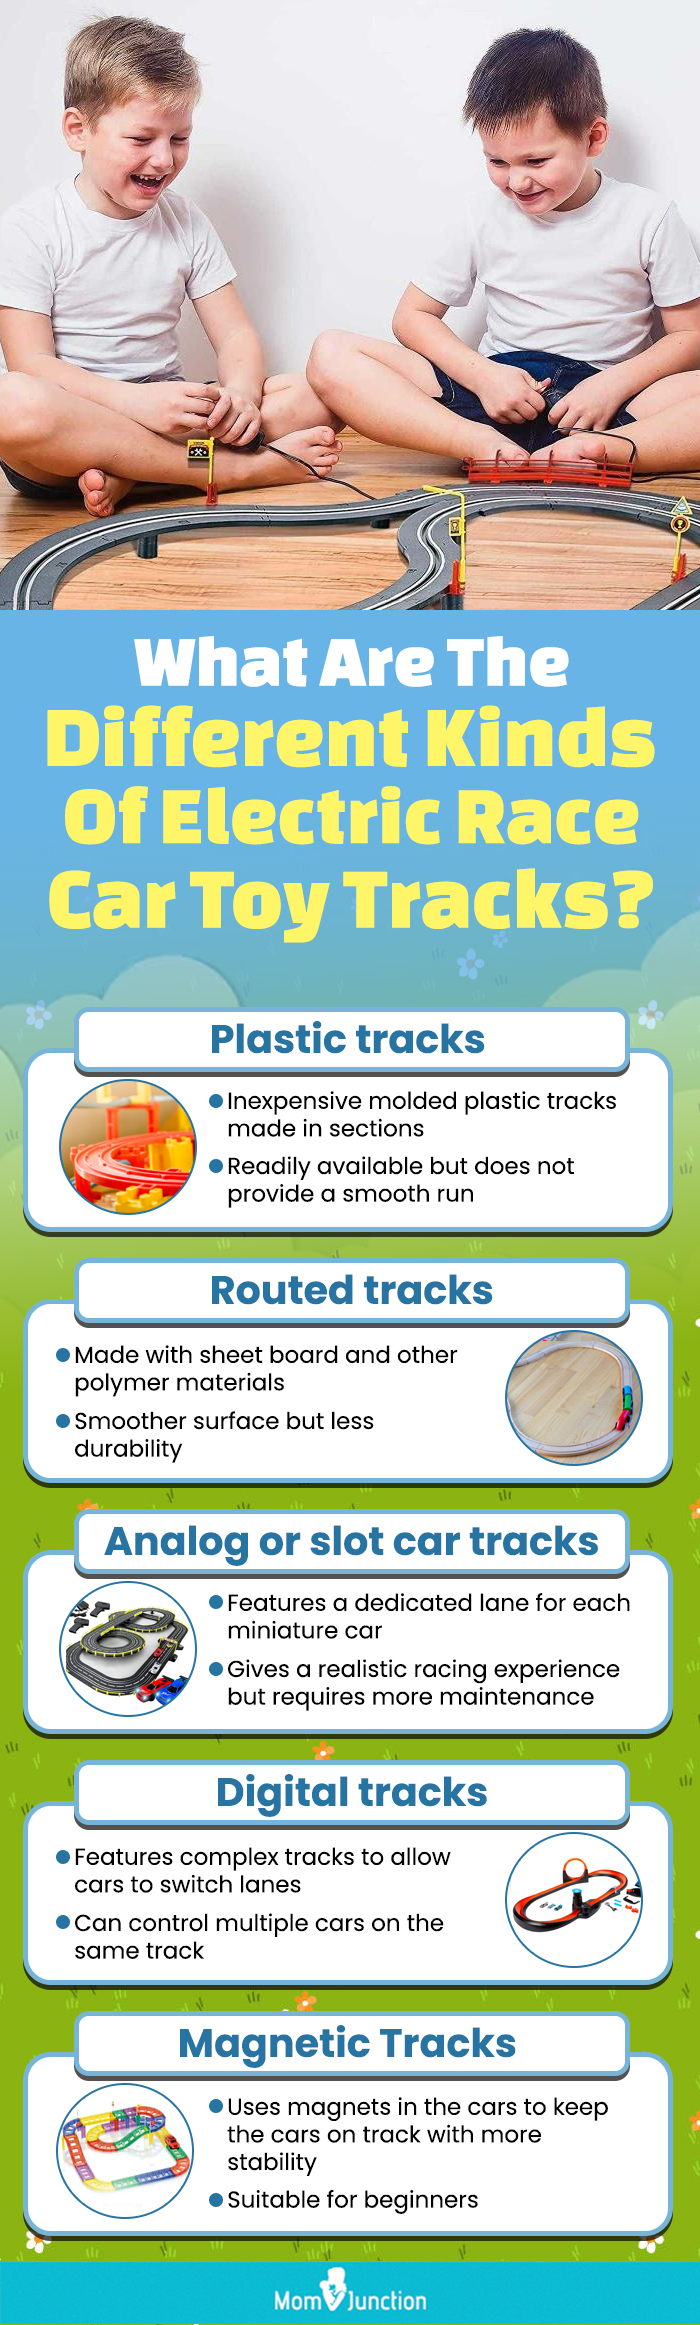 What Are The Different Kinds Of Electric Race Car Toy Tracks (infographic)